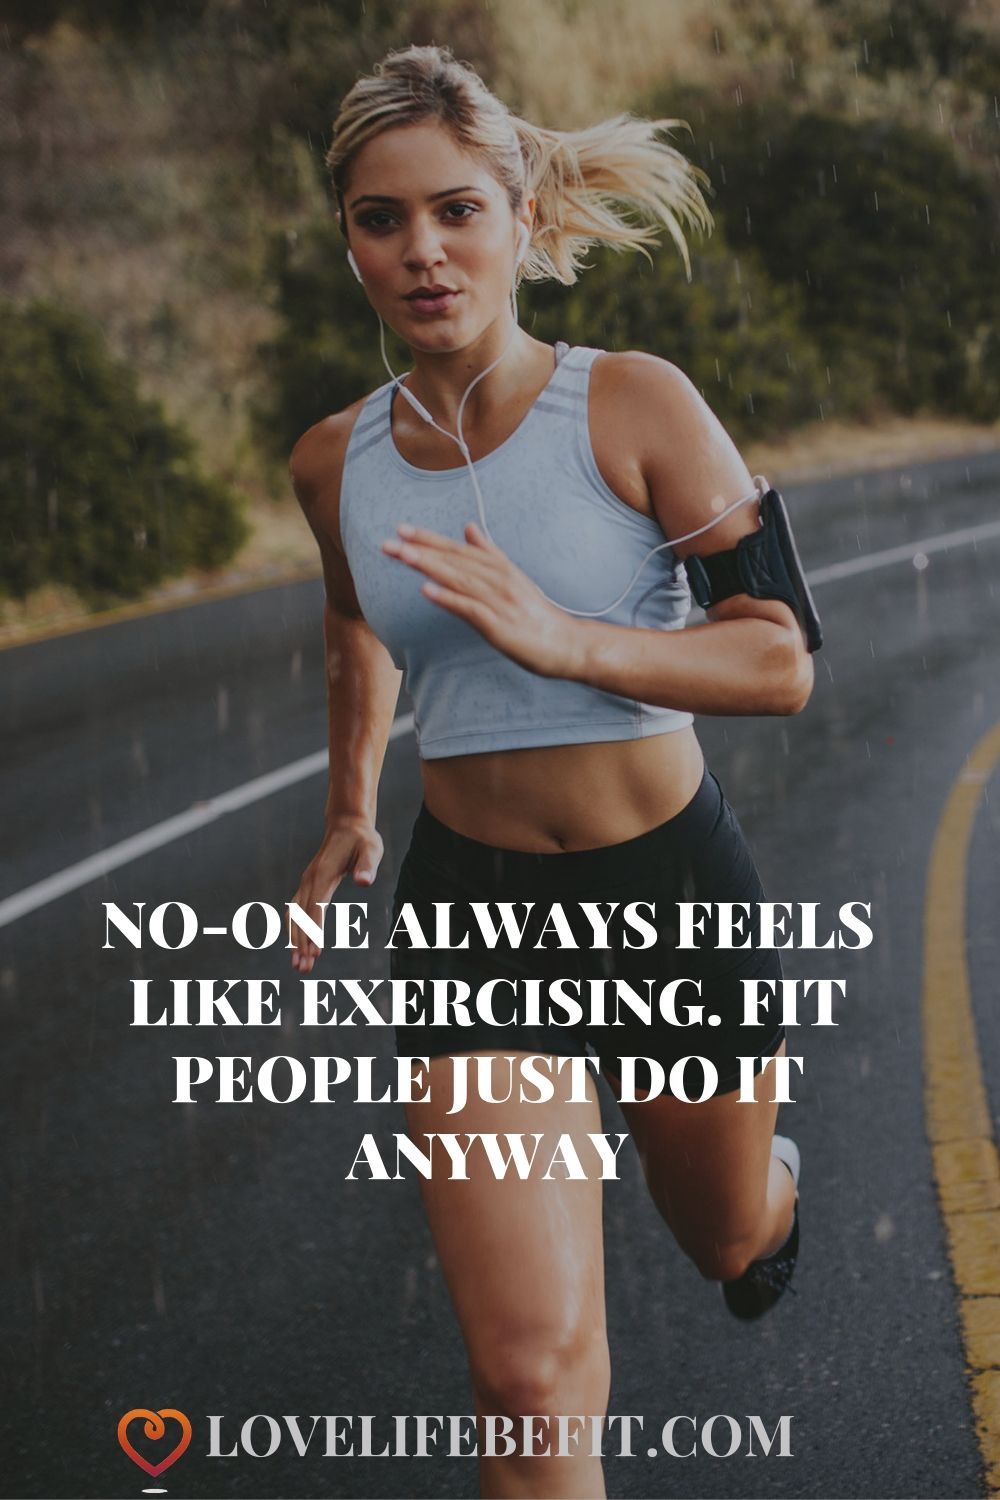 8 Tips To Motivate Yourself To Exercise - 8 Tips To Motivate Yourself To Exercise -   14 fitness Lifestyle goals ideas